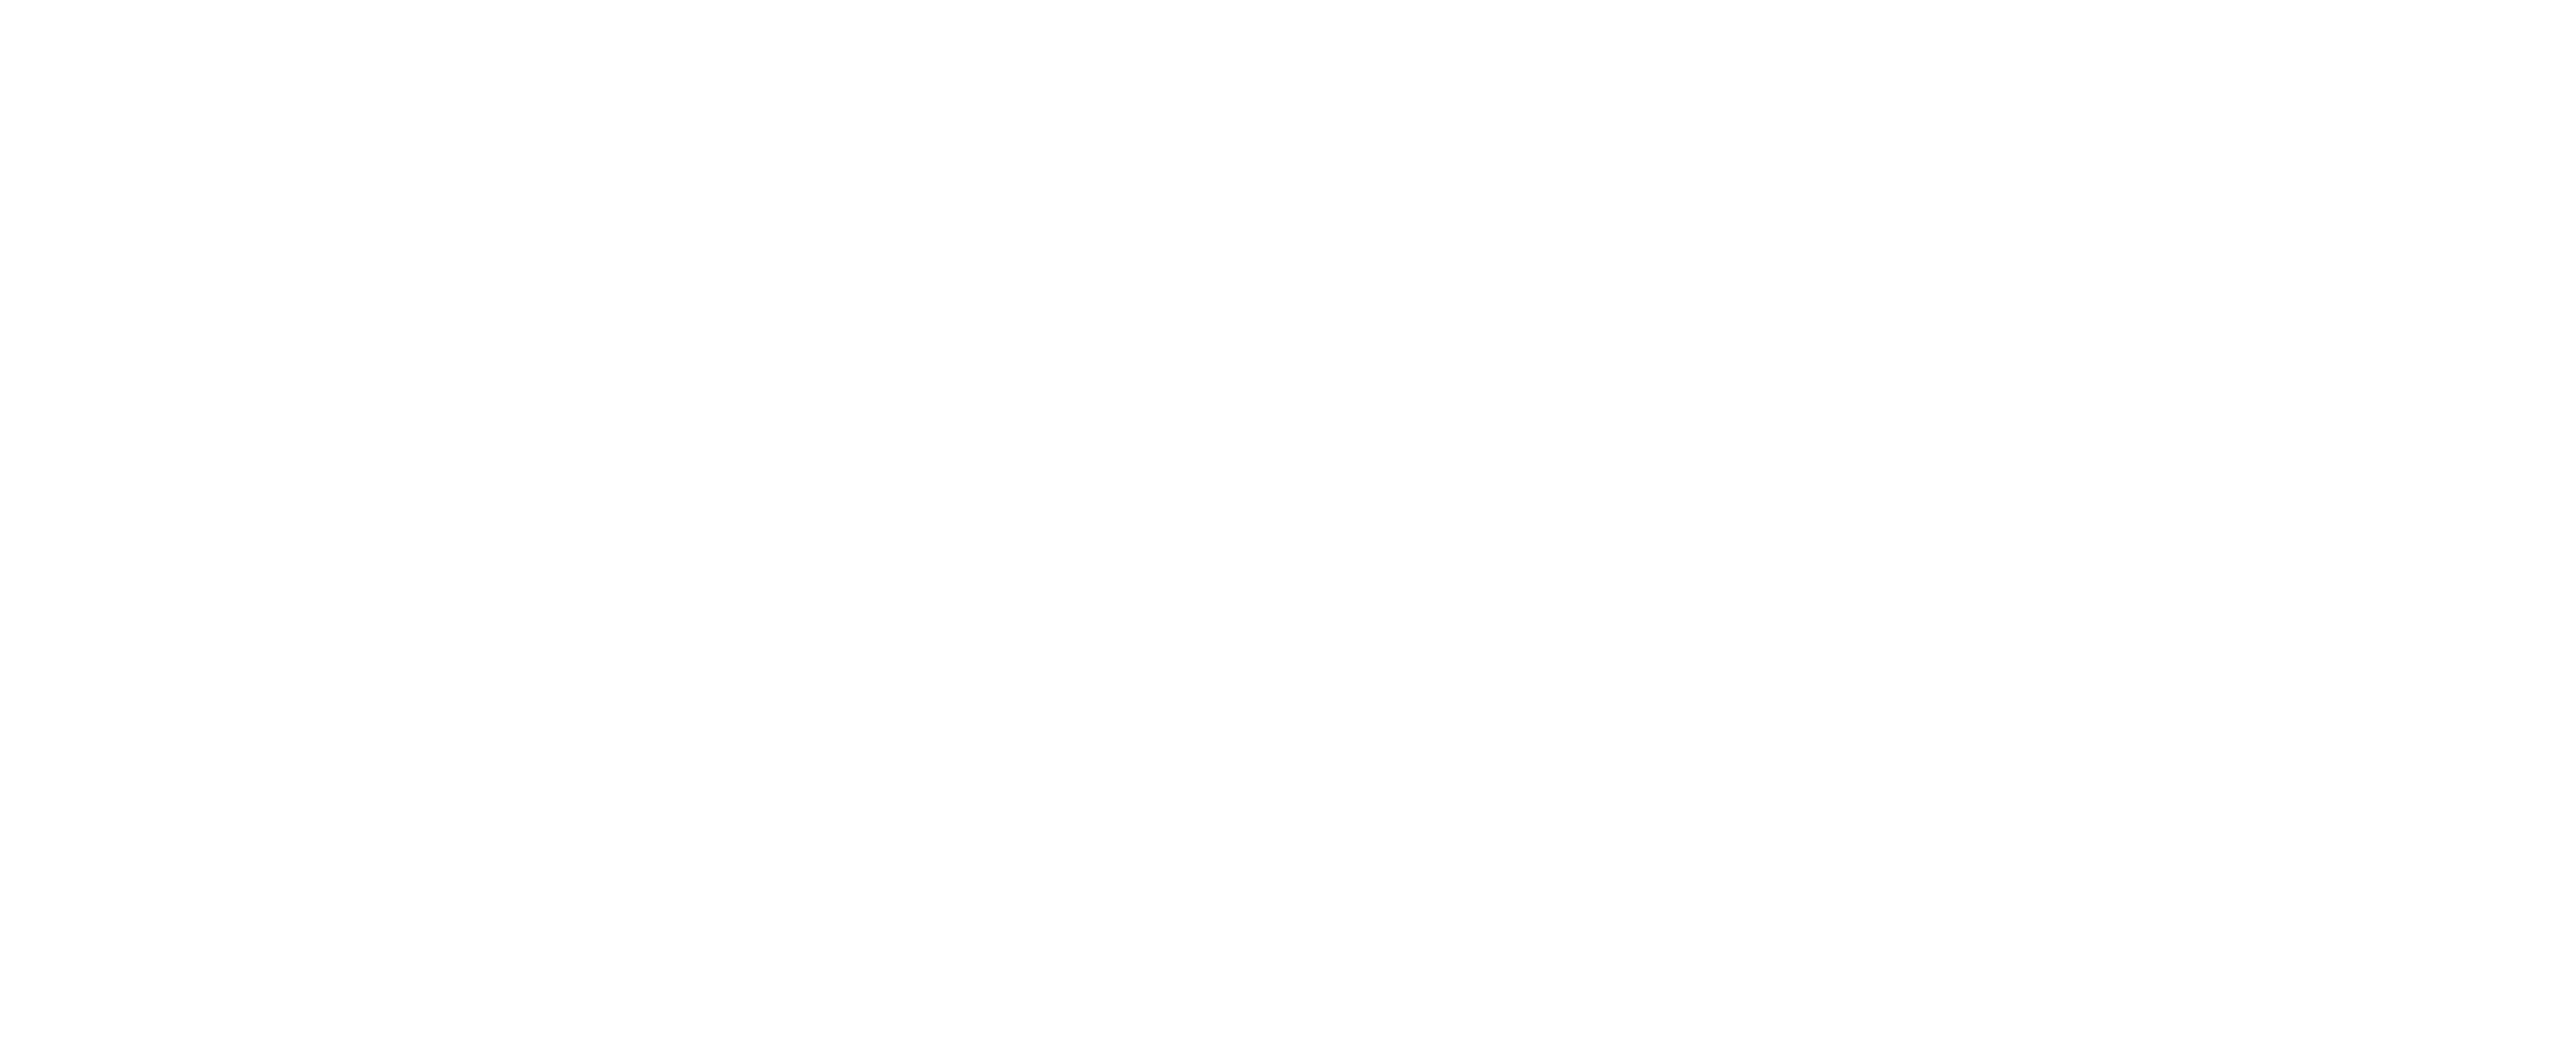 Back to Paramount Property Corporation Site